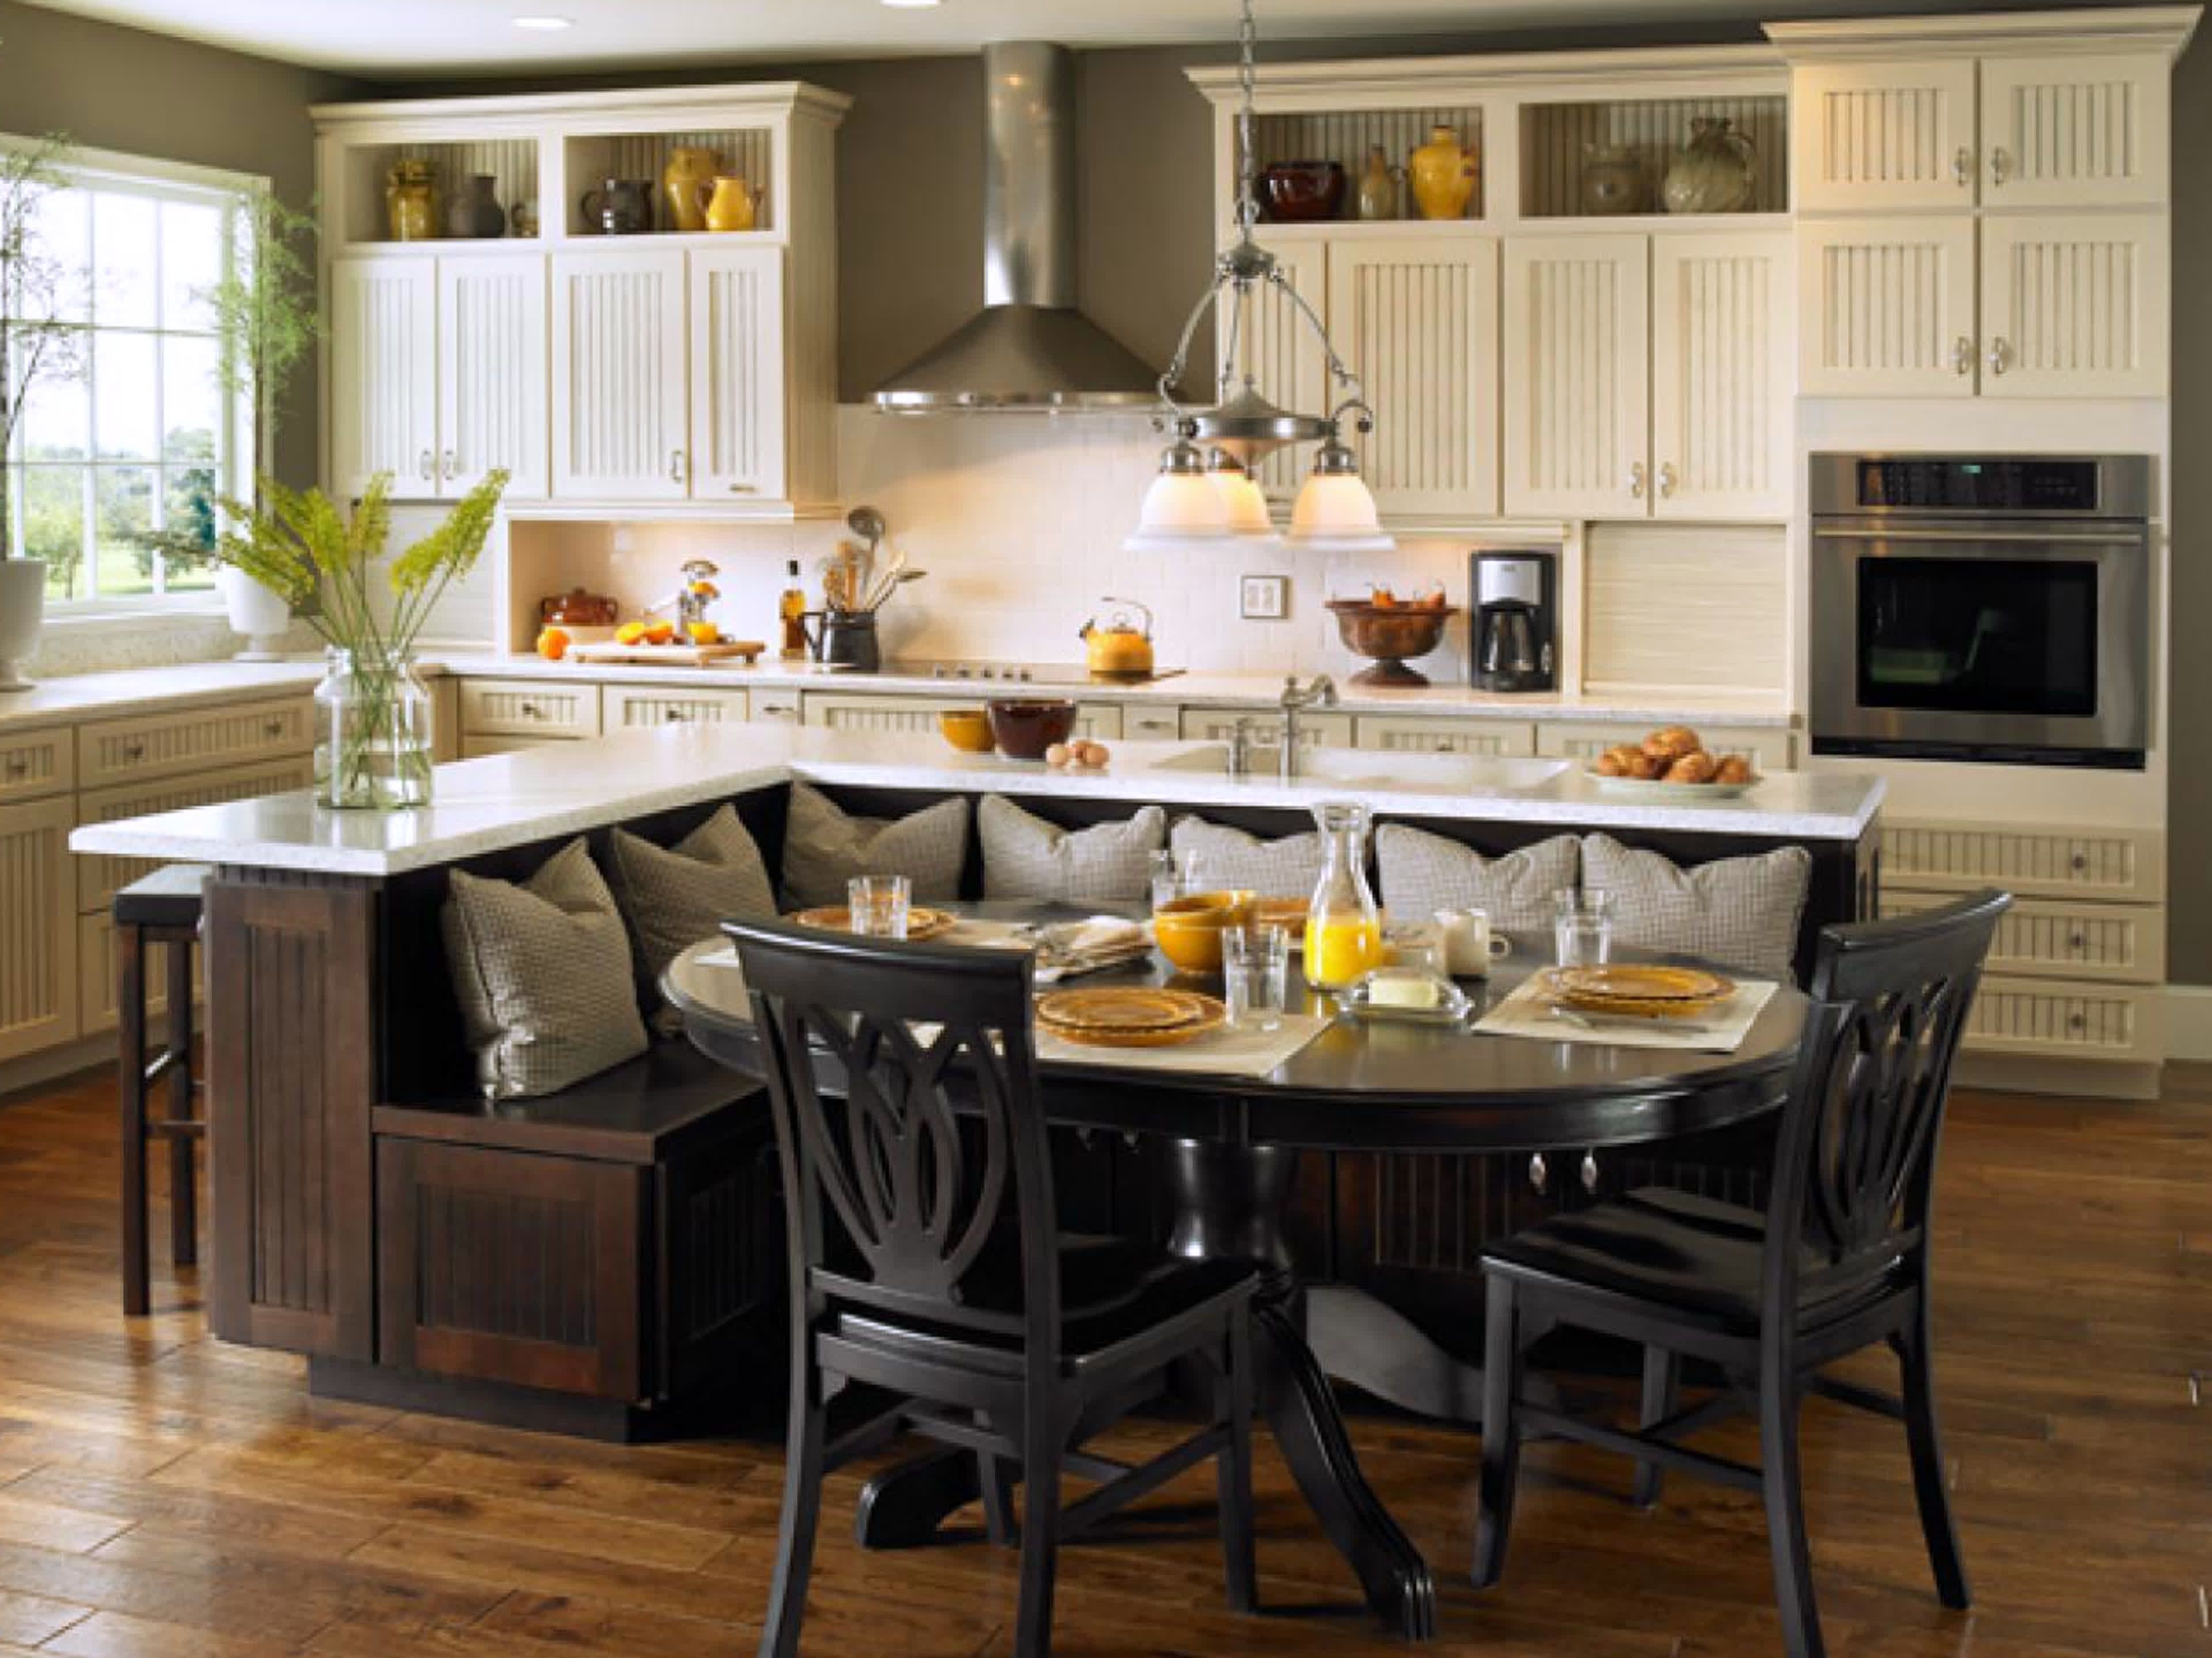 Functional Kitchen Islands With Storage And Seating